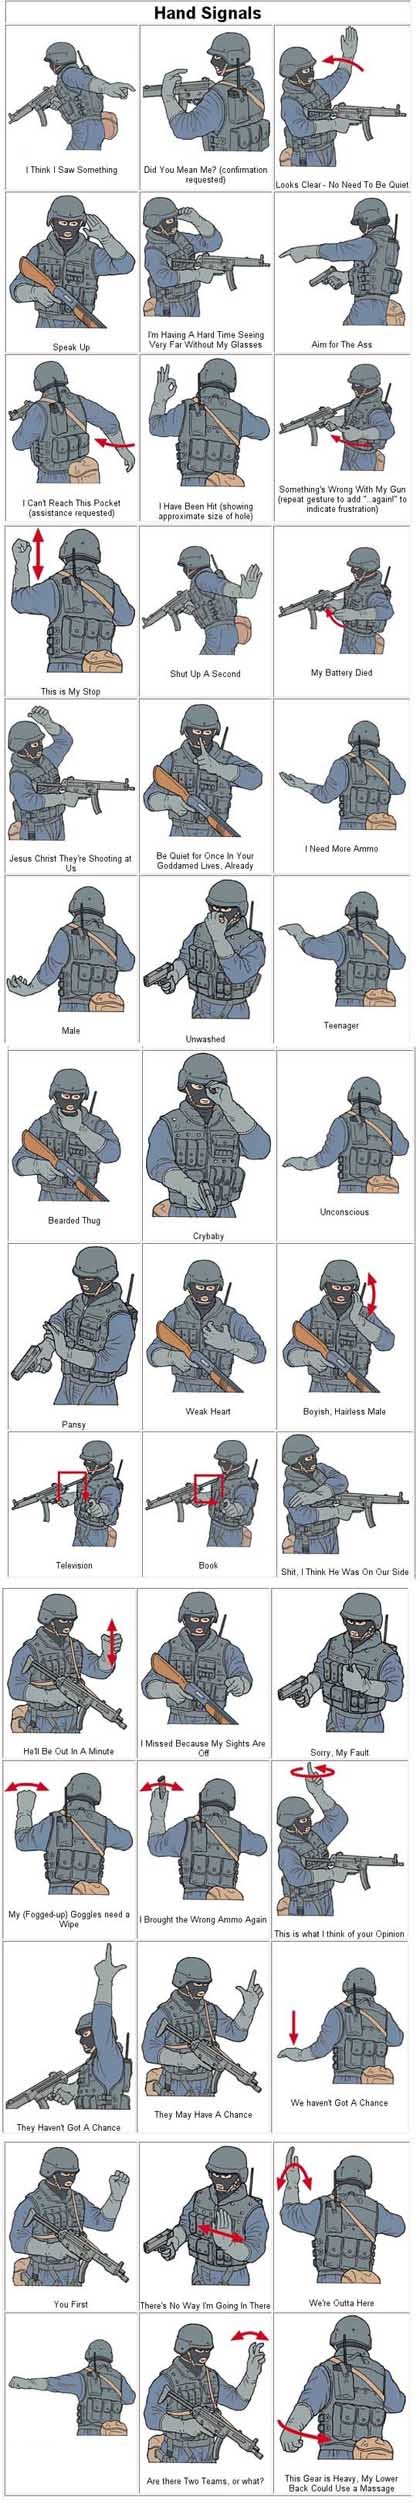 Actual gestures used by SWAT tems are label with silly meanings.